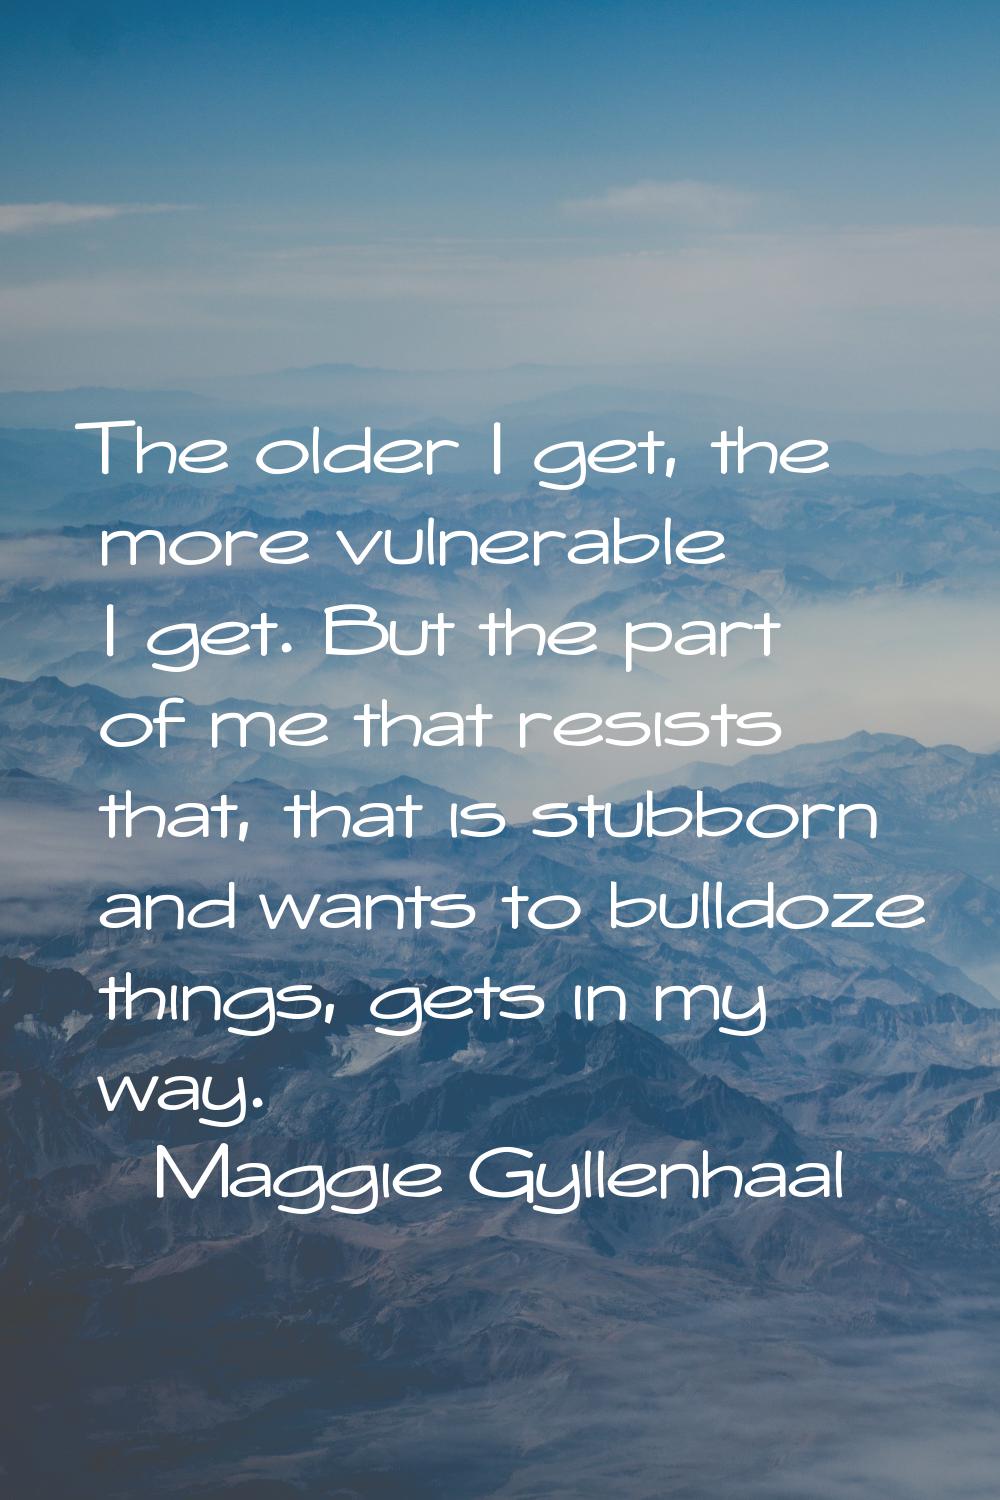 The older I get, the more vulnerable I get. But the part of me that resists that, that is stubborn 